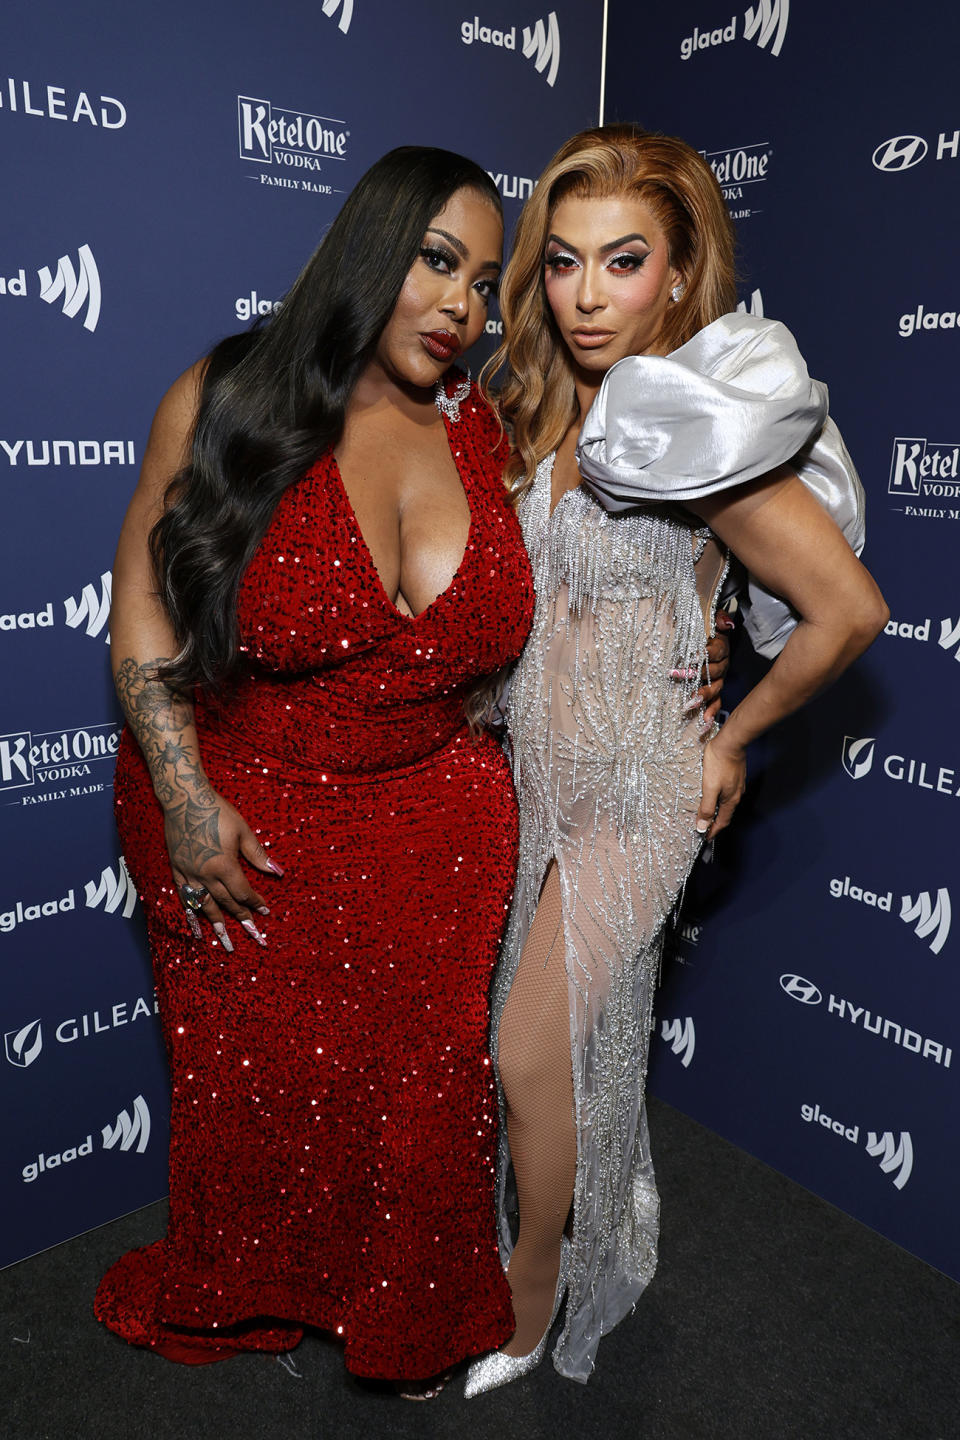 <p>BEVERLY HILLS, CALIFORNIA – MARCH 30: (L-R) Ts Madison and Shangela attend the GLAAD Media Awards at The Beverly Hilton on March 30, 2023 in Beverly Hills, California. (Photo by Frazer Harrison/Getty Images for GLAAD)</p>